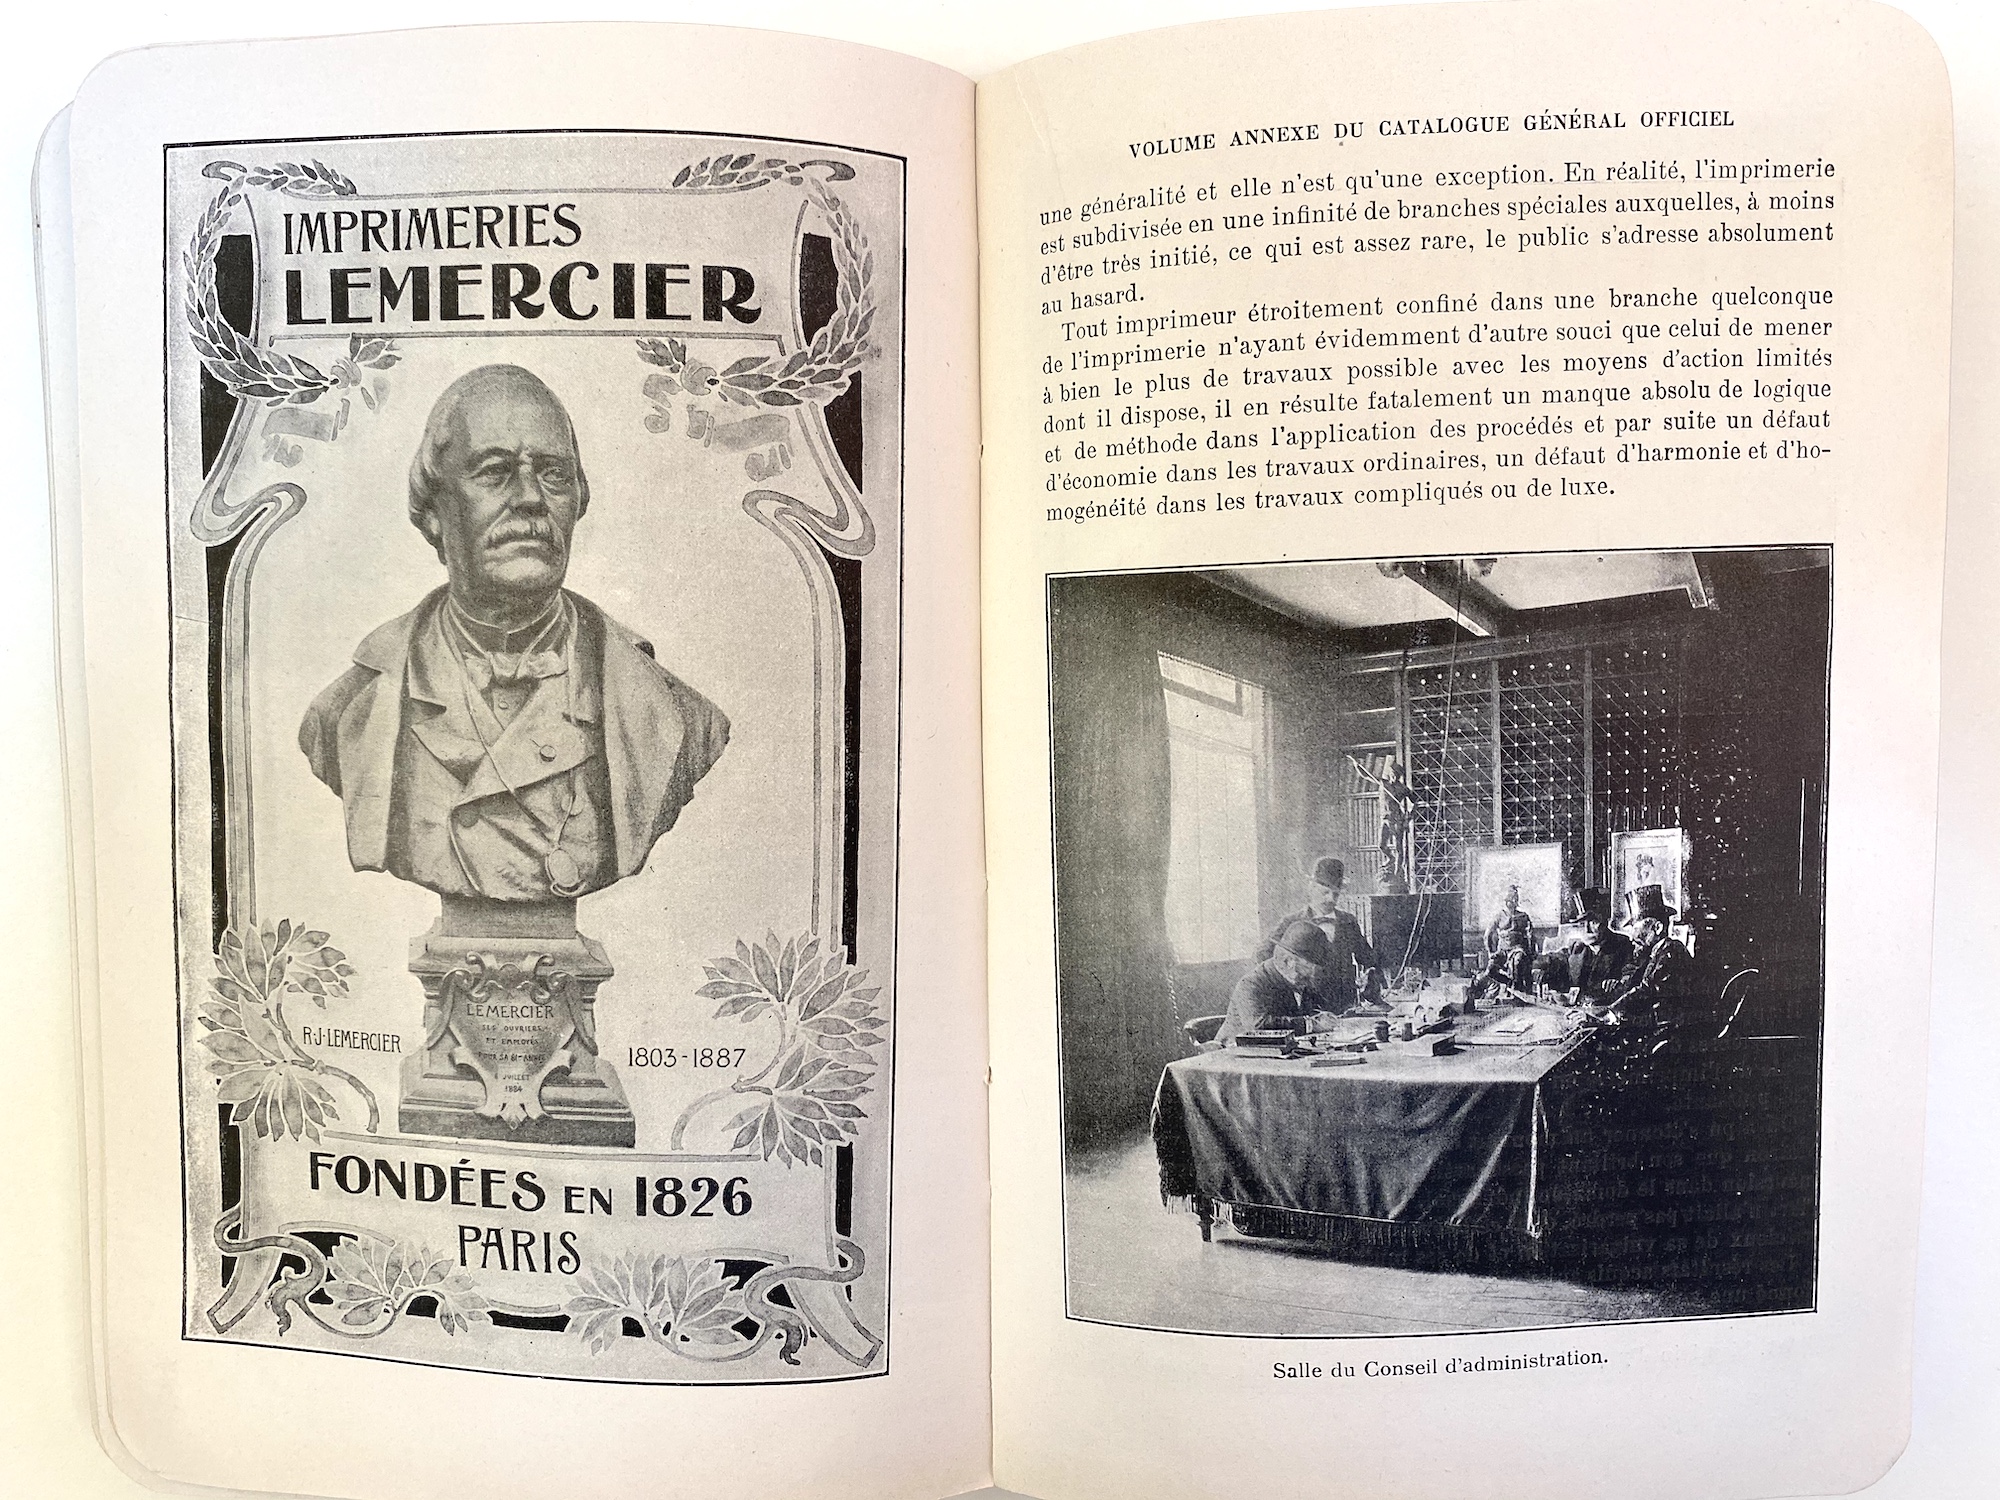 Compare the bust of Lemercier with the portrait of him in the lithograph he published of himself and his establishment in 1842.